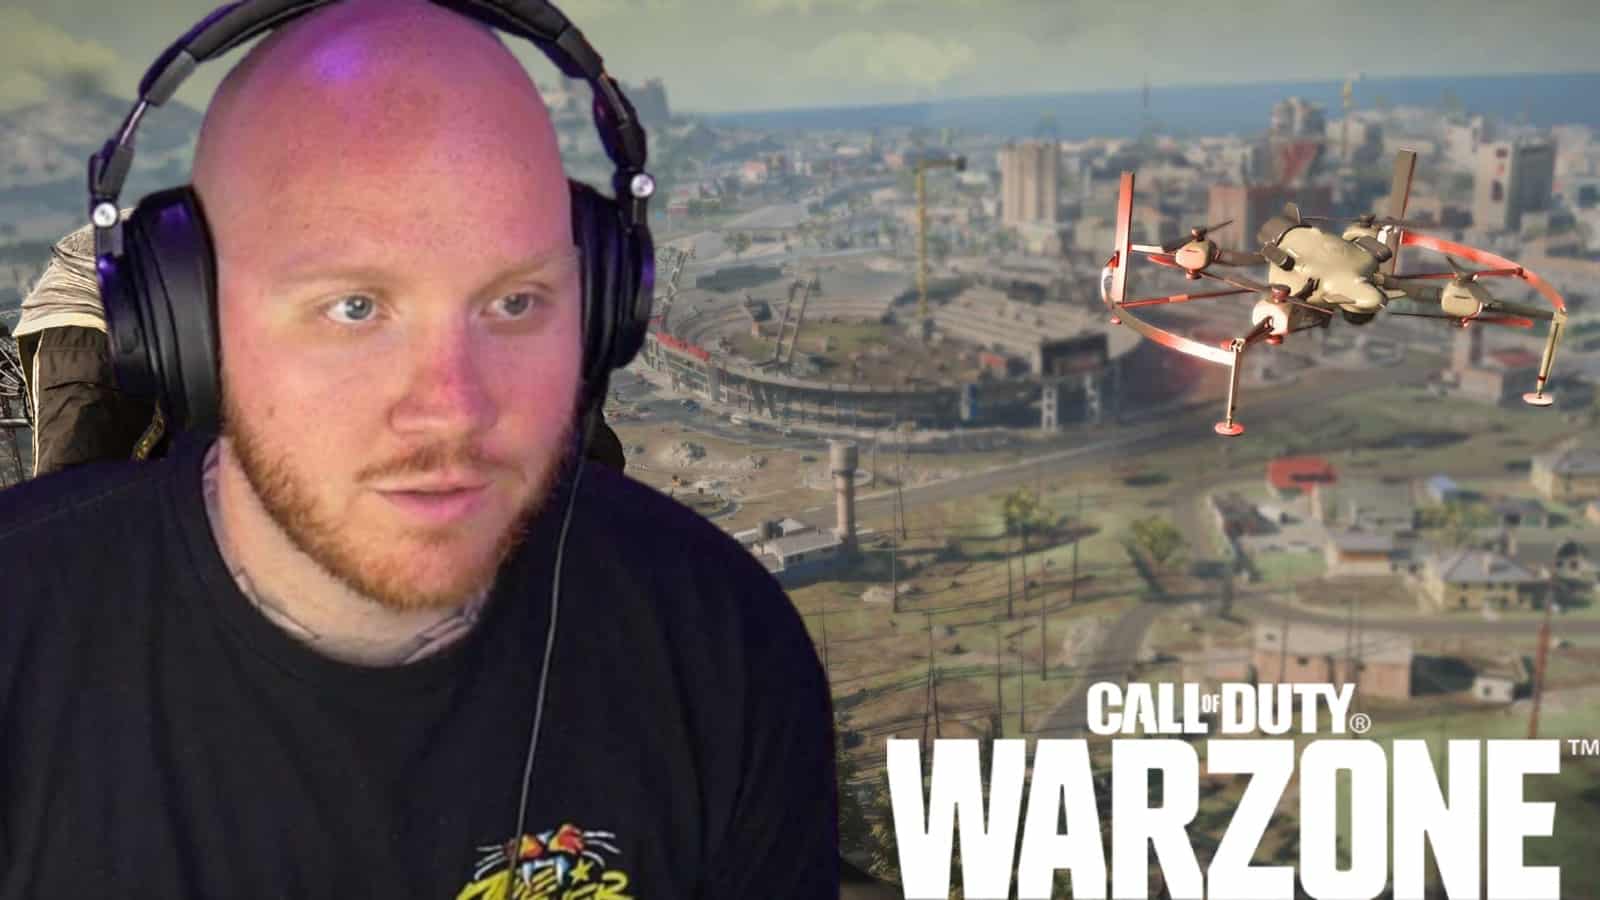 TimtheTatman superimposed in front of the Warzone map Verdansk